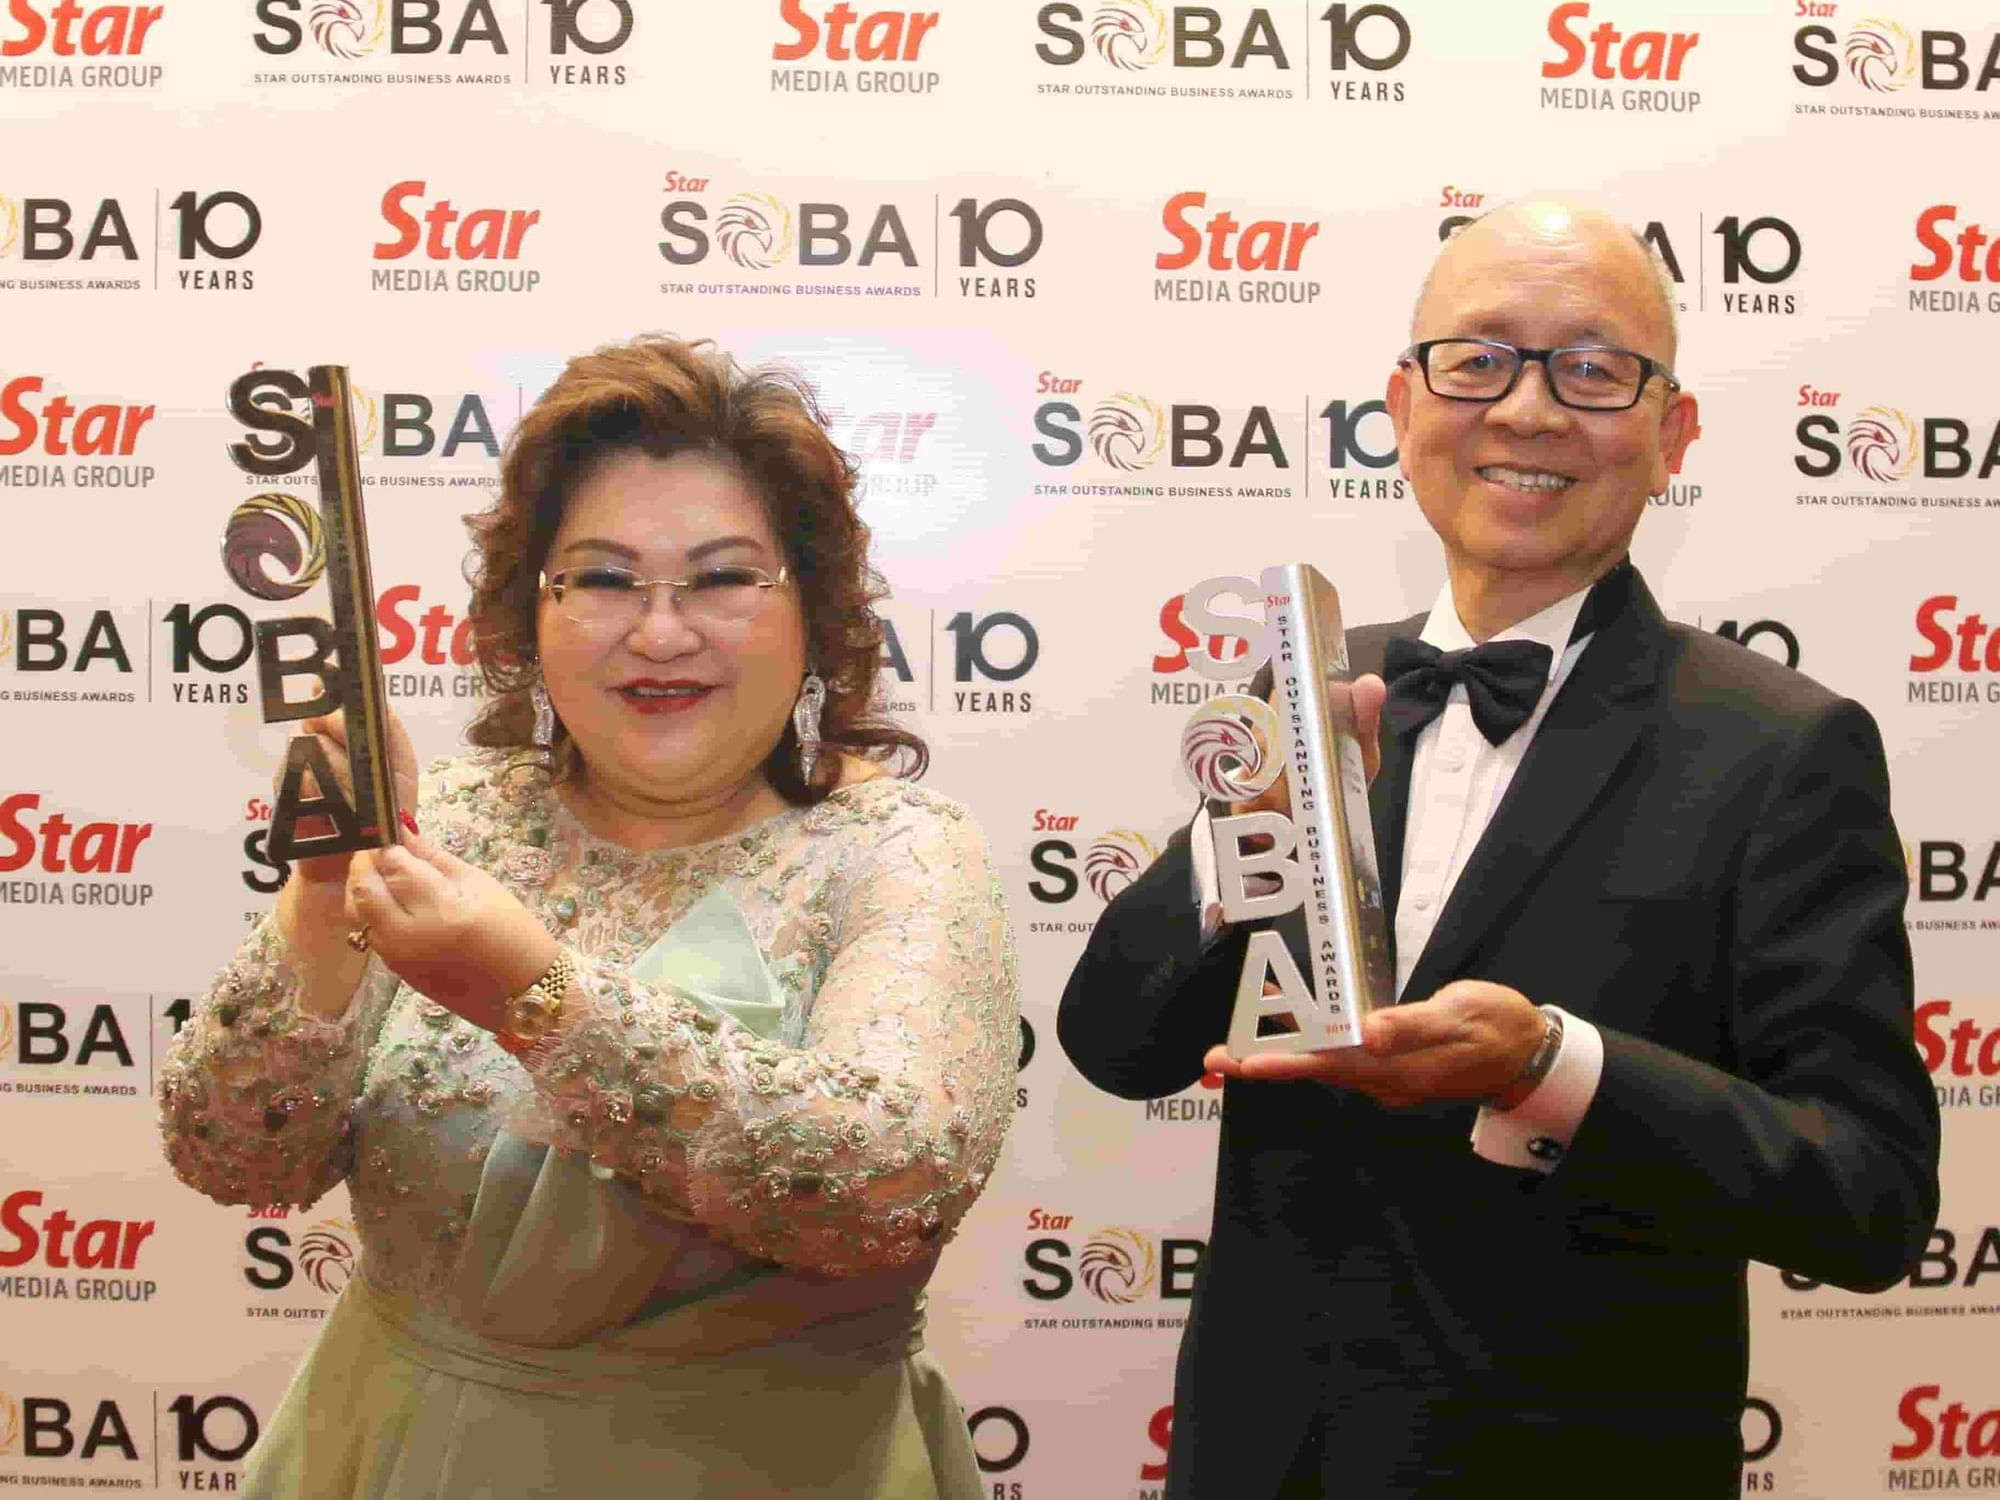 News 2020 - Star Outstanding Business Awards | Lexis® Hotel Group